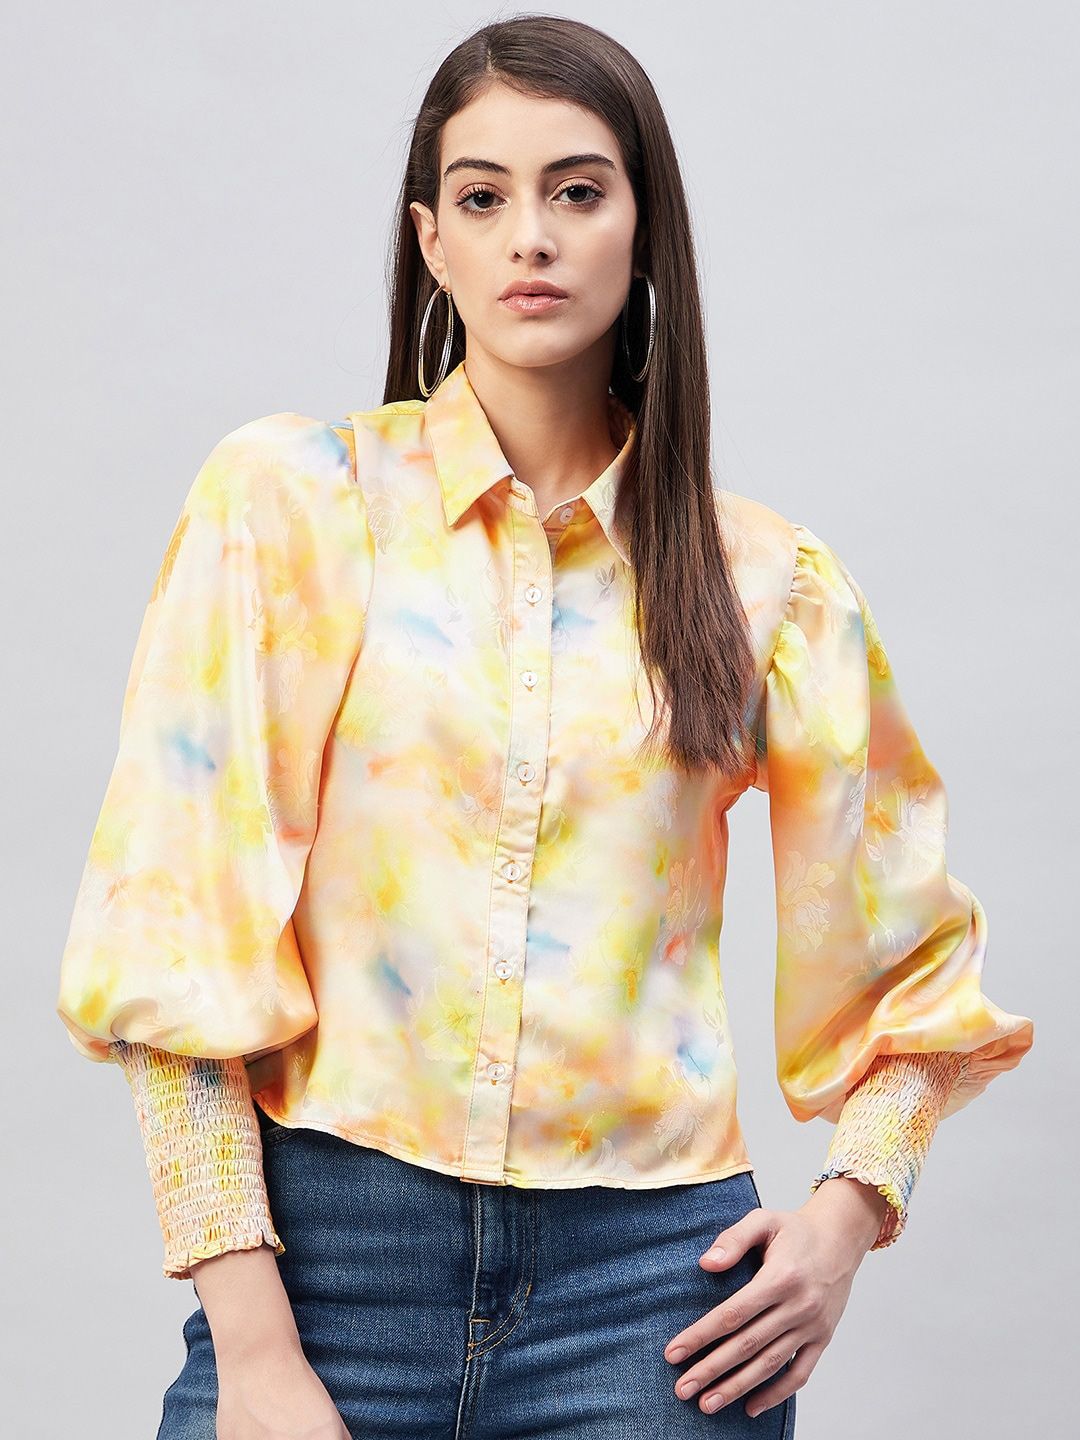 Marie Claire Printed Bishop Sleeves Shirt Style Top Price in India